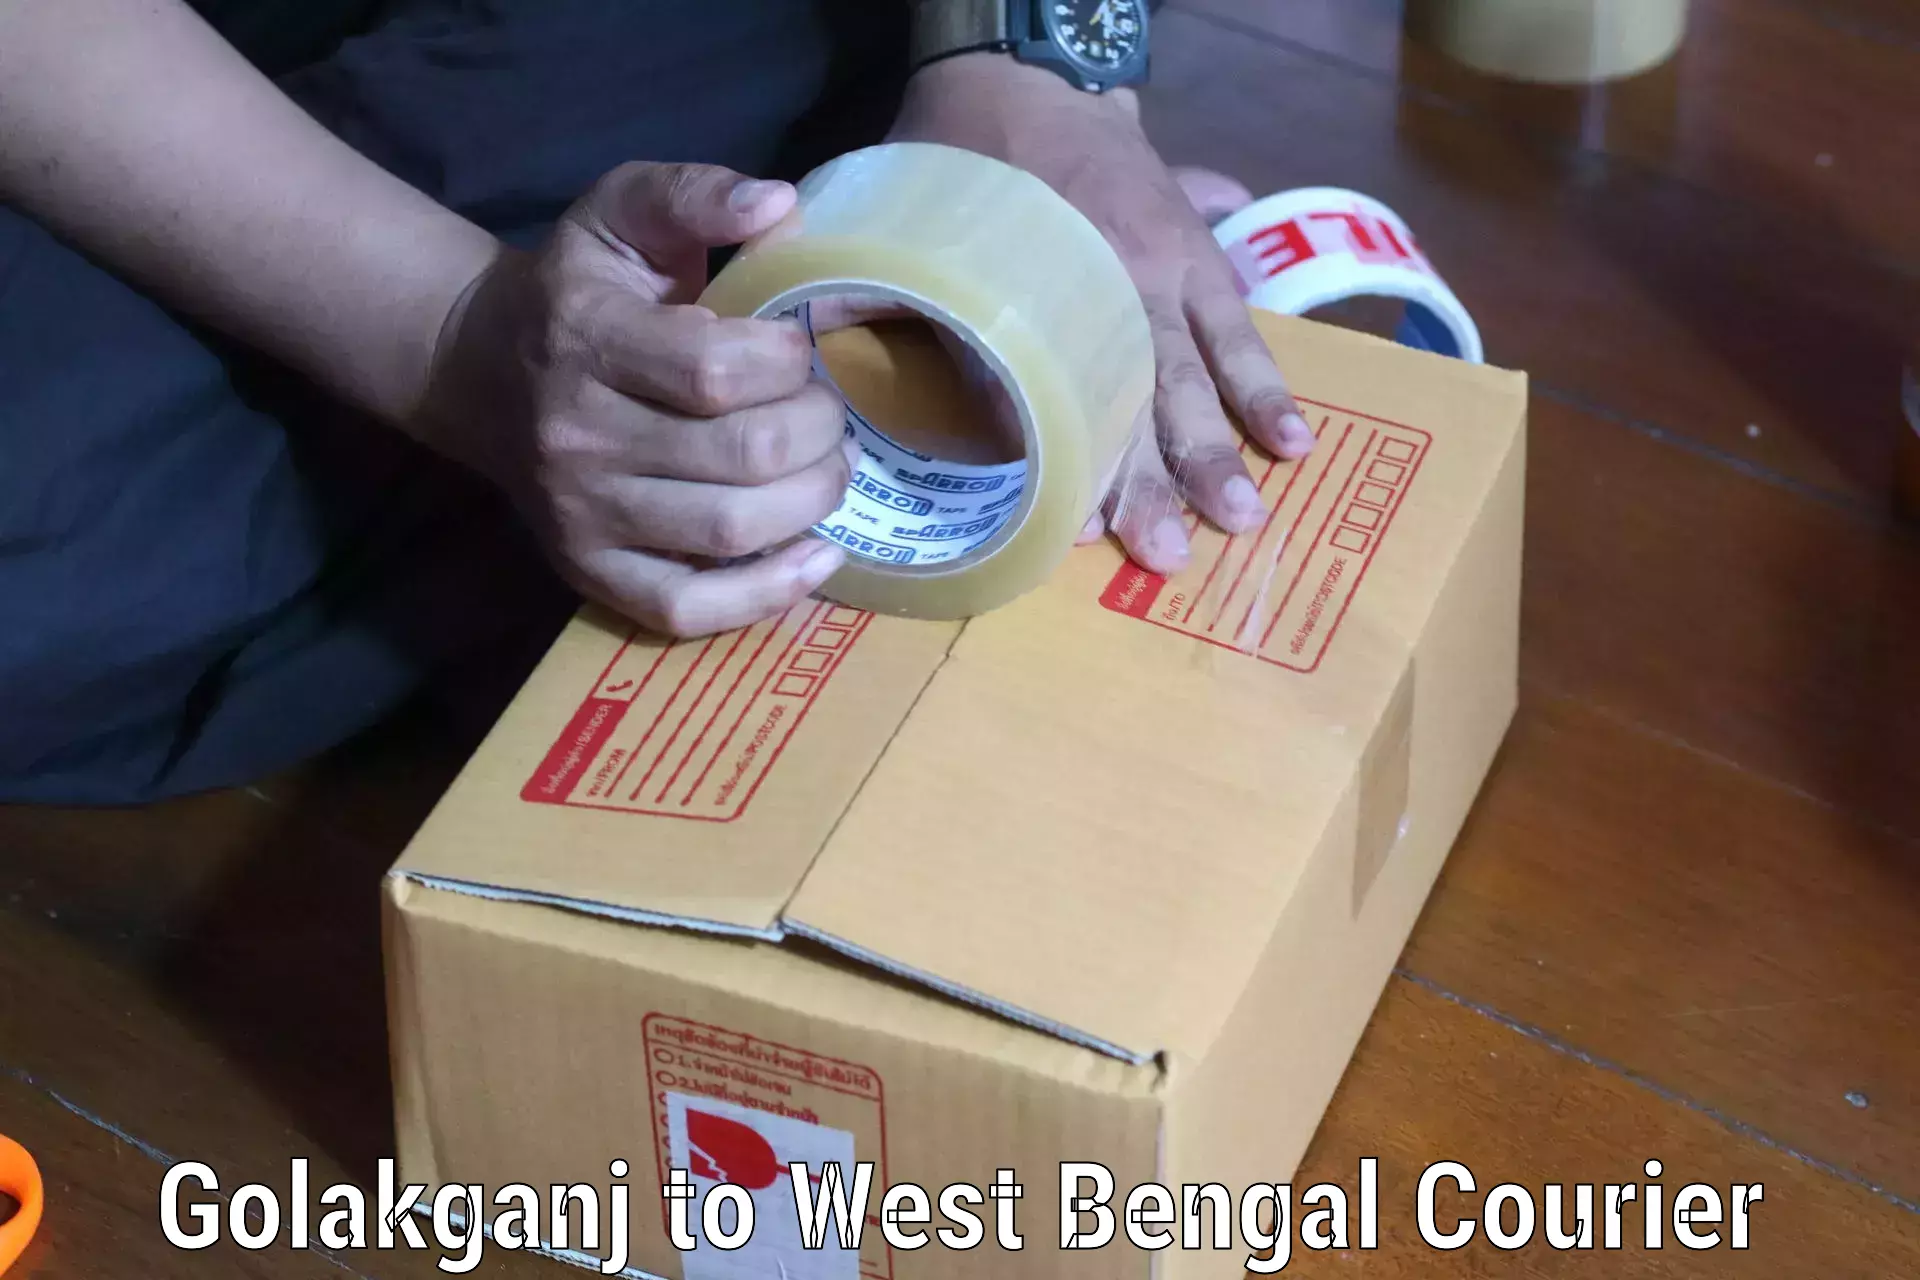 Quality courier services Golakganj to Howrah